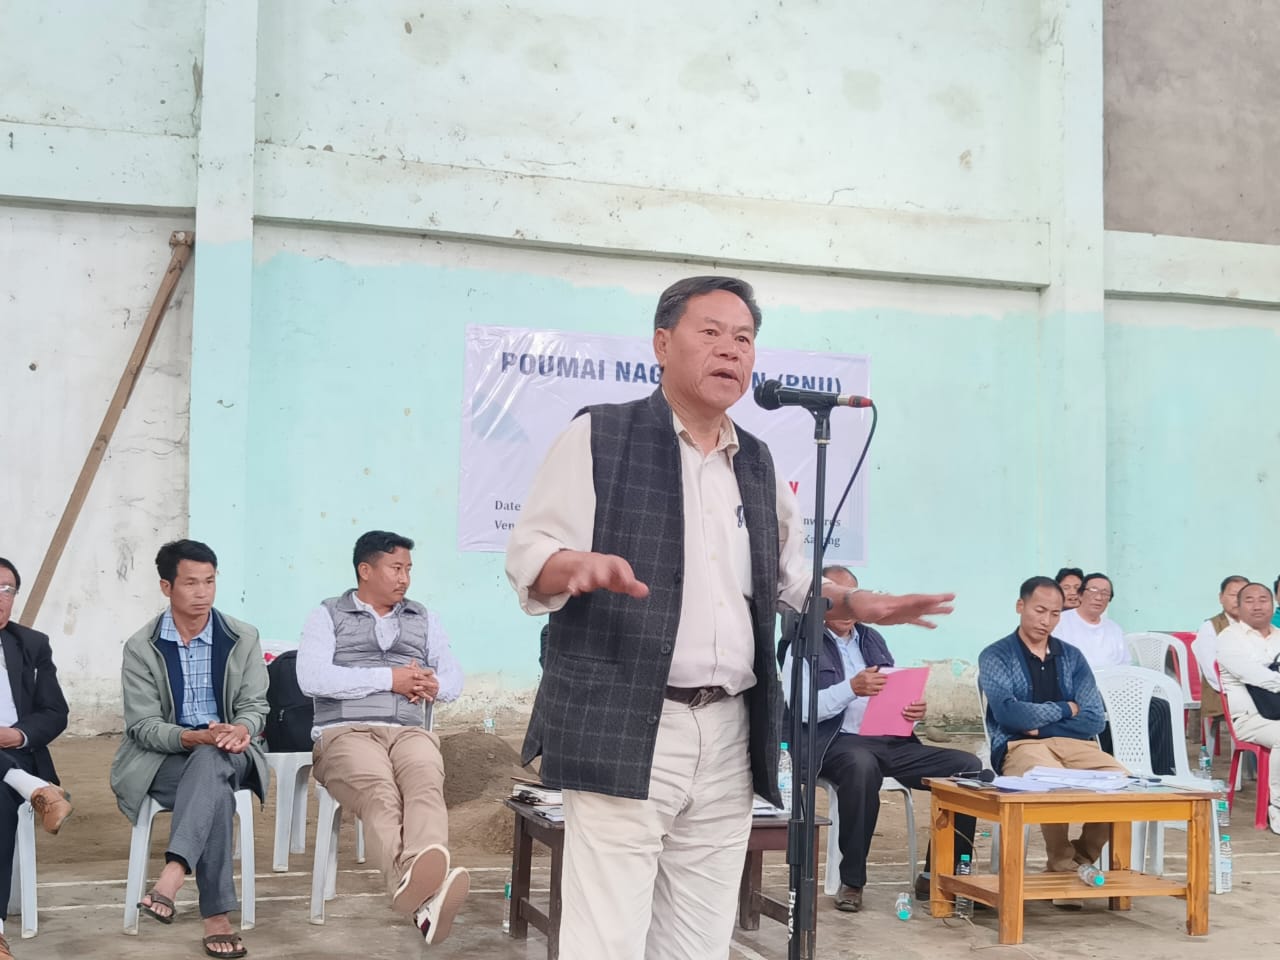 poumai-naga-in-manipur-reaffirm-support-to-independent-candidate-kho-john